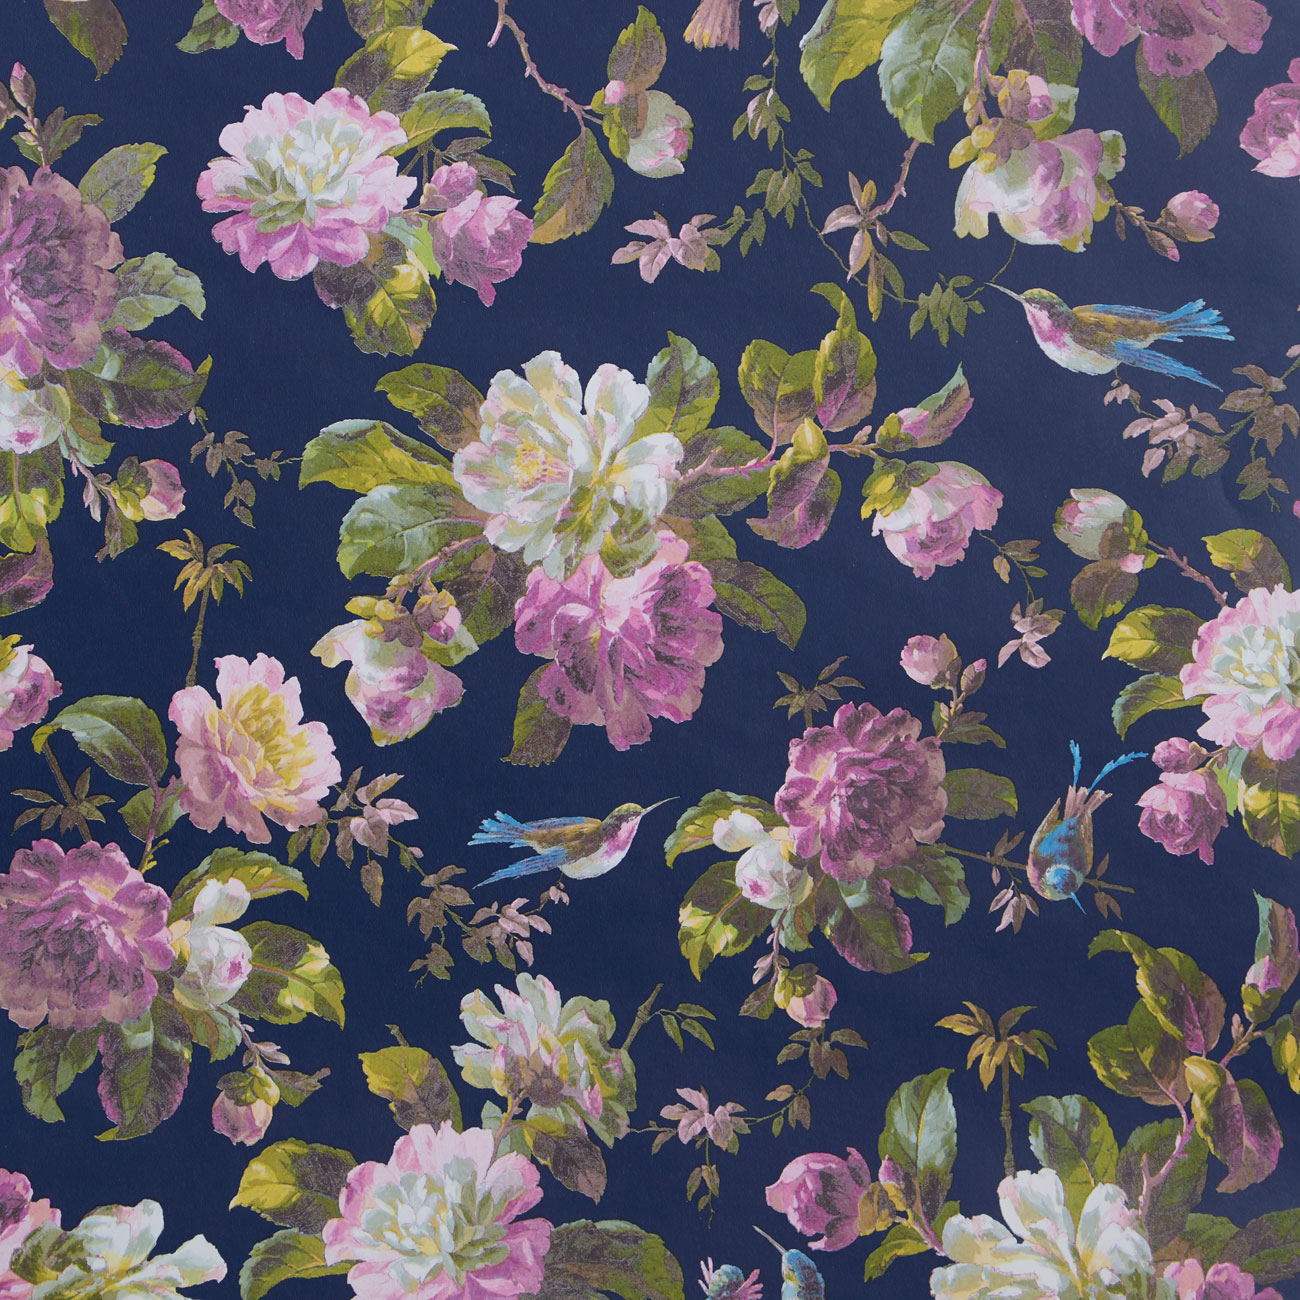 Floral wallpaper in Classic Blue, rose, lime